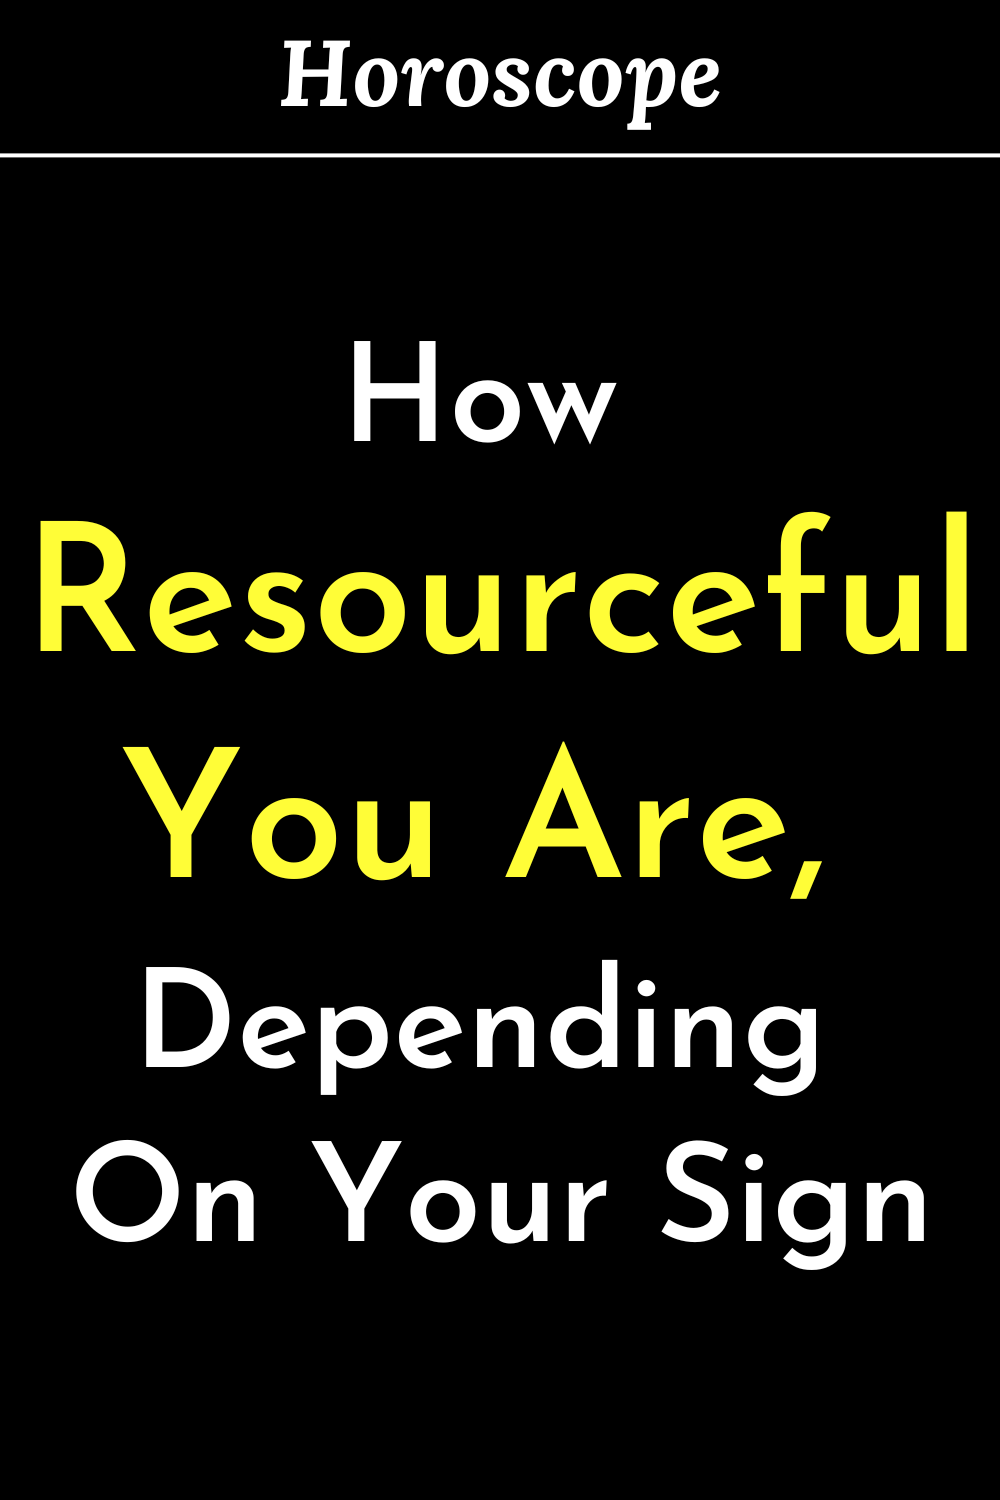 How Resourceful You Are, Depending On Your Sign